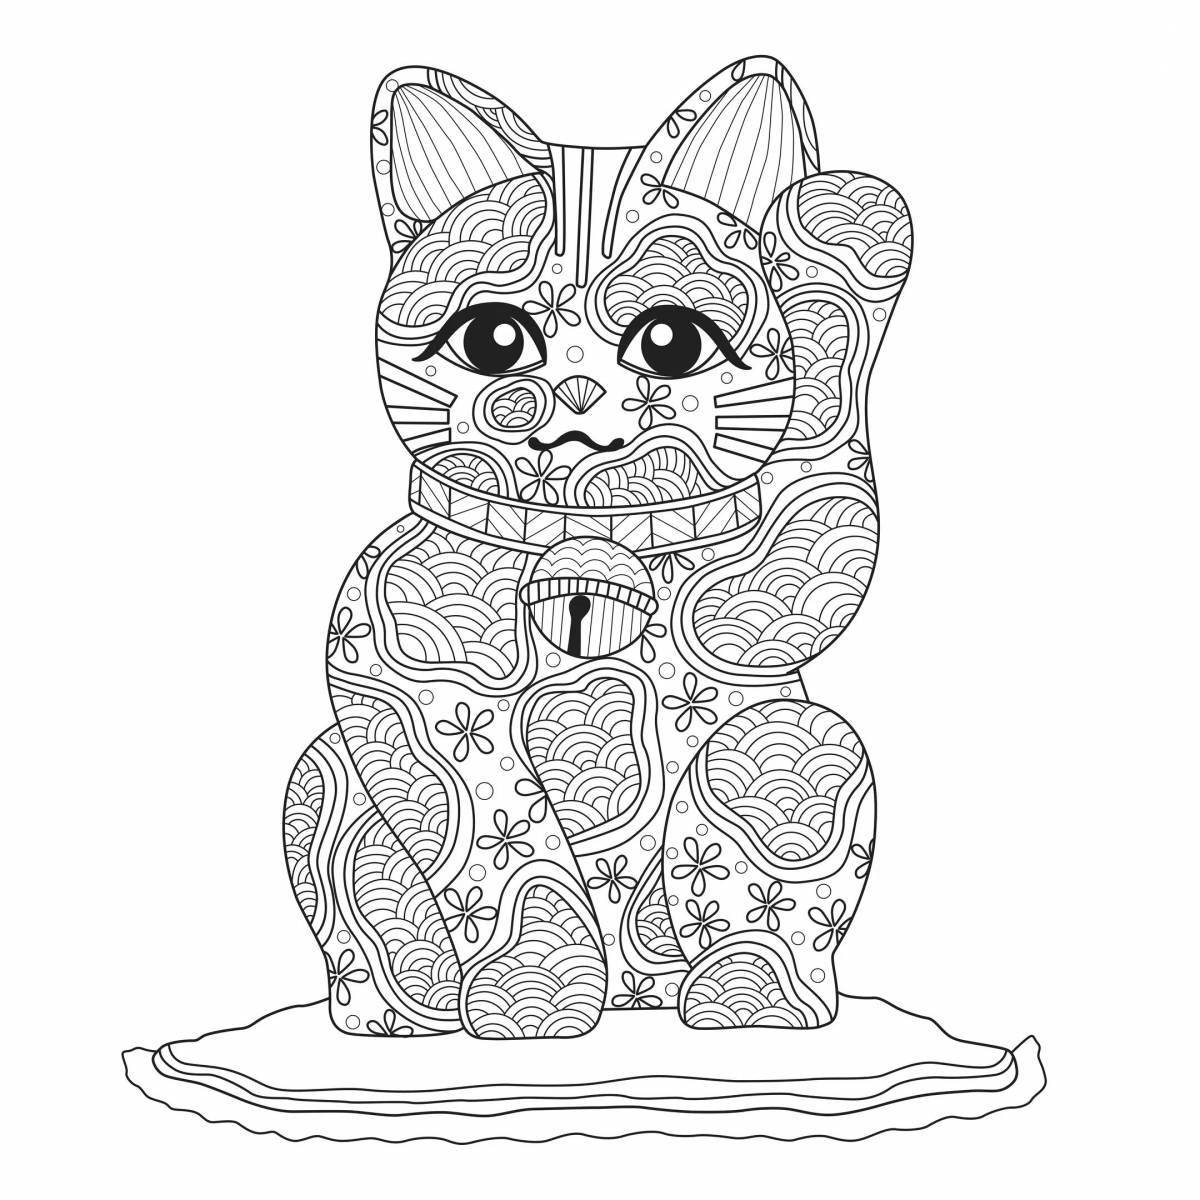 Adorable Chinese cat coloring book